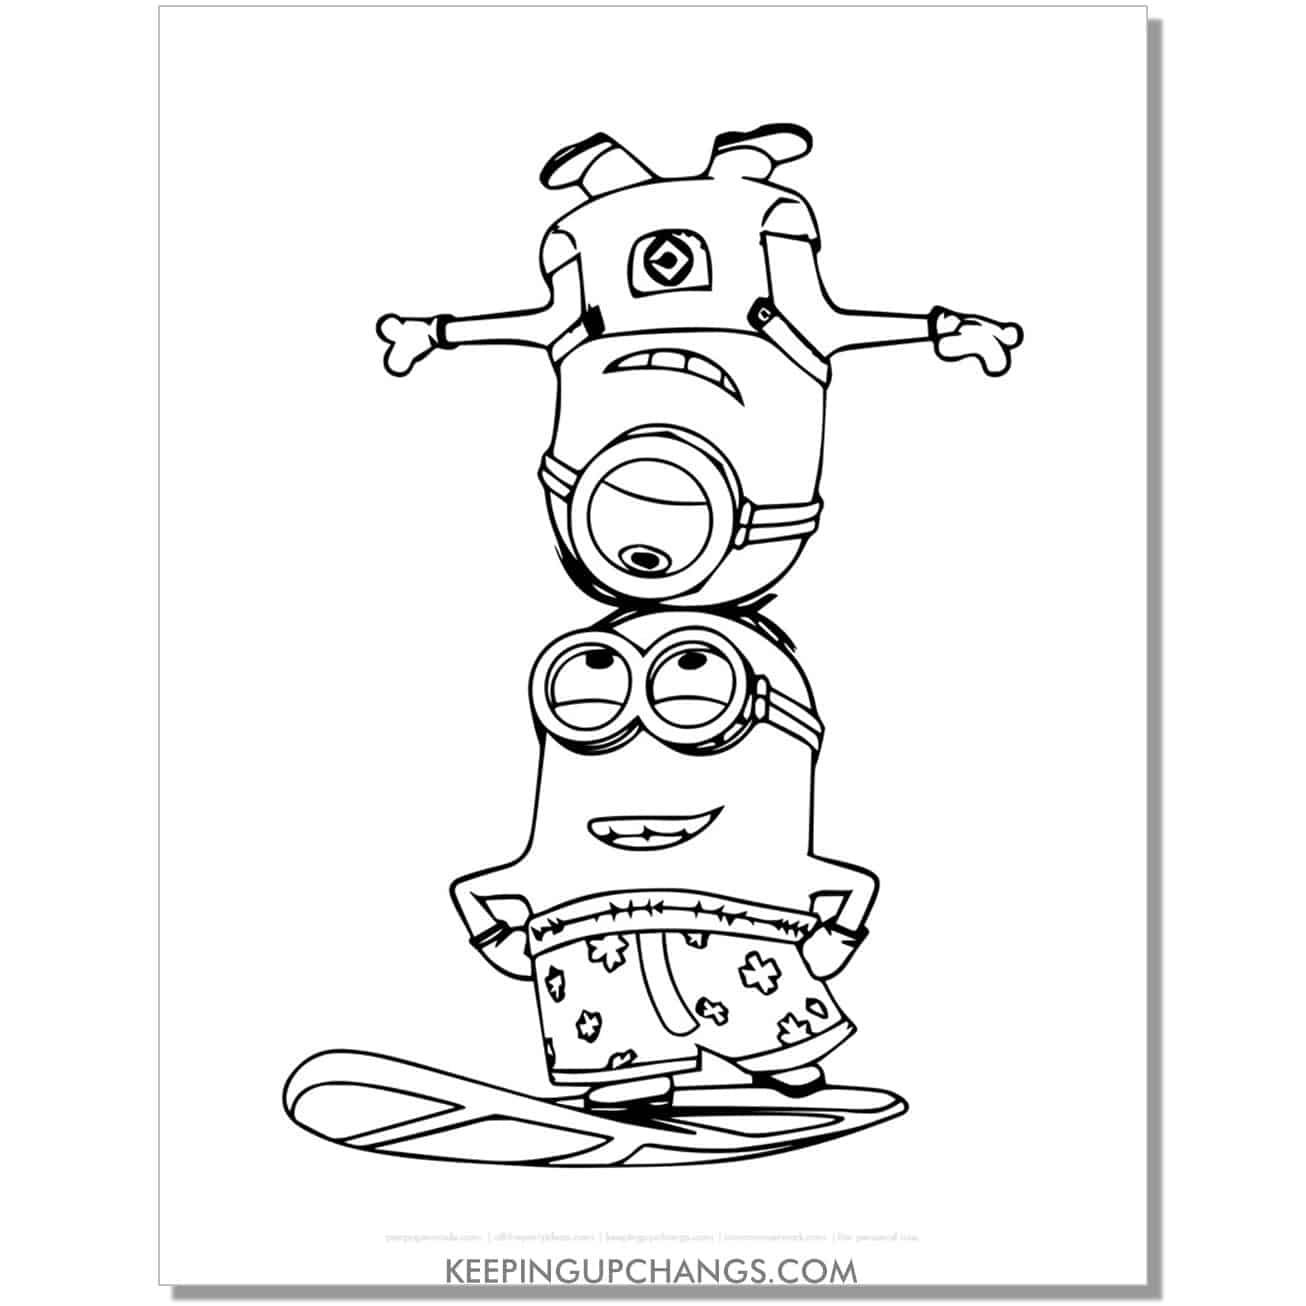 free one minion balancing on other minion's head coloring page, sheet.